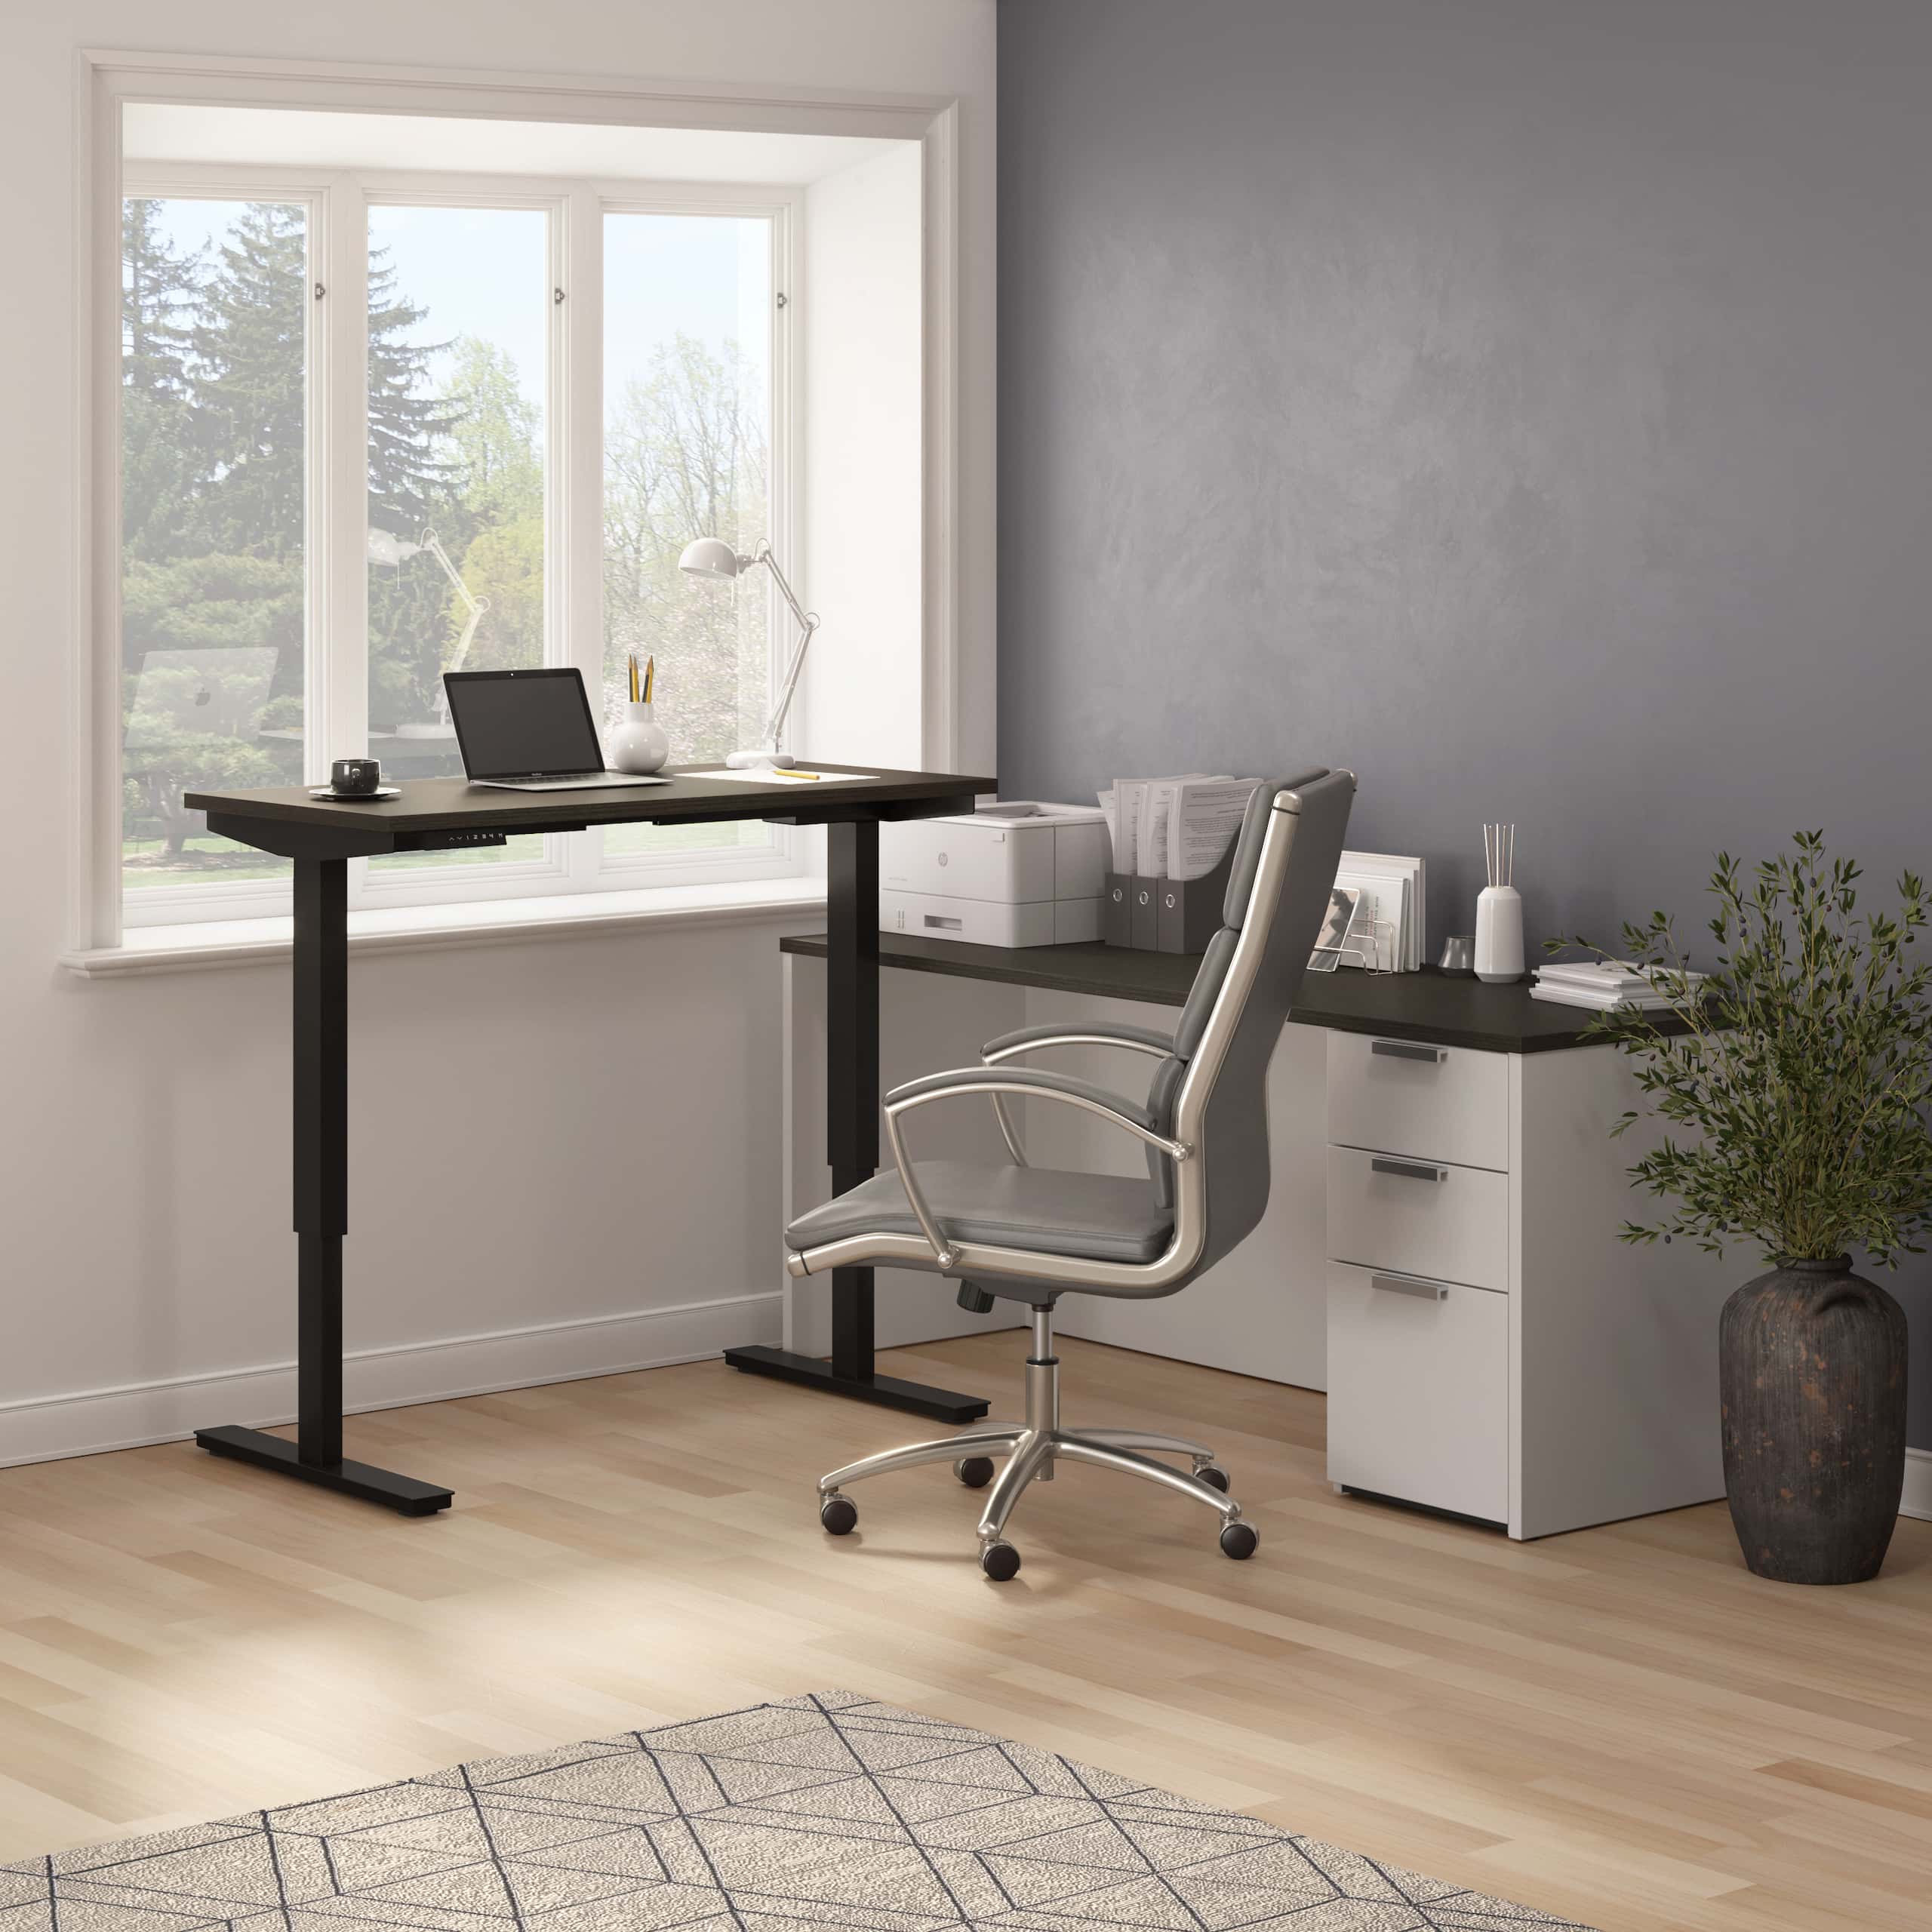 L-Shaped desk with standing desk in a relaxing work environment